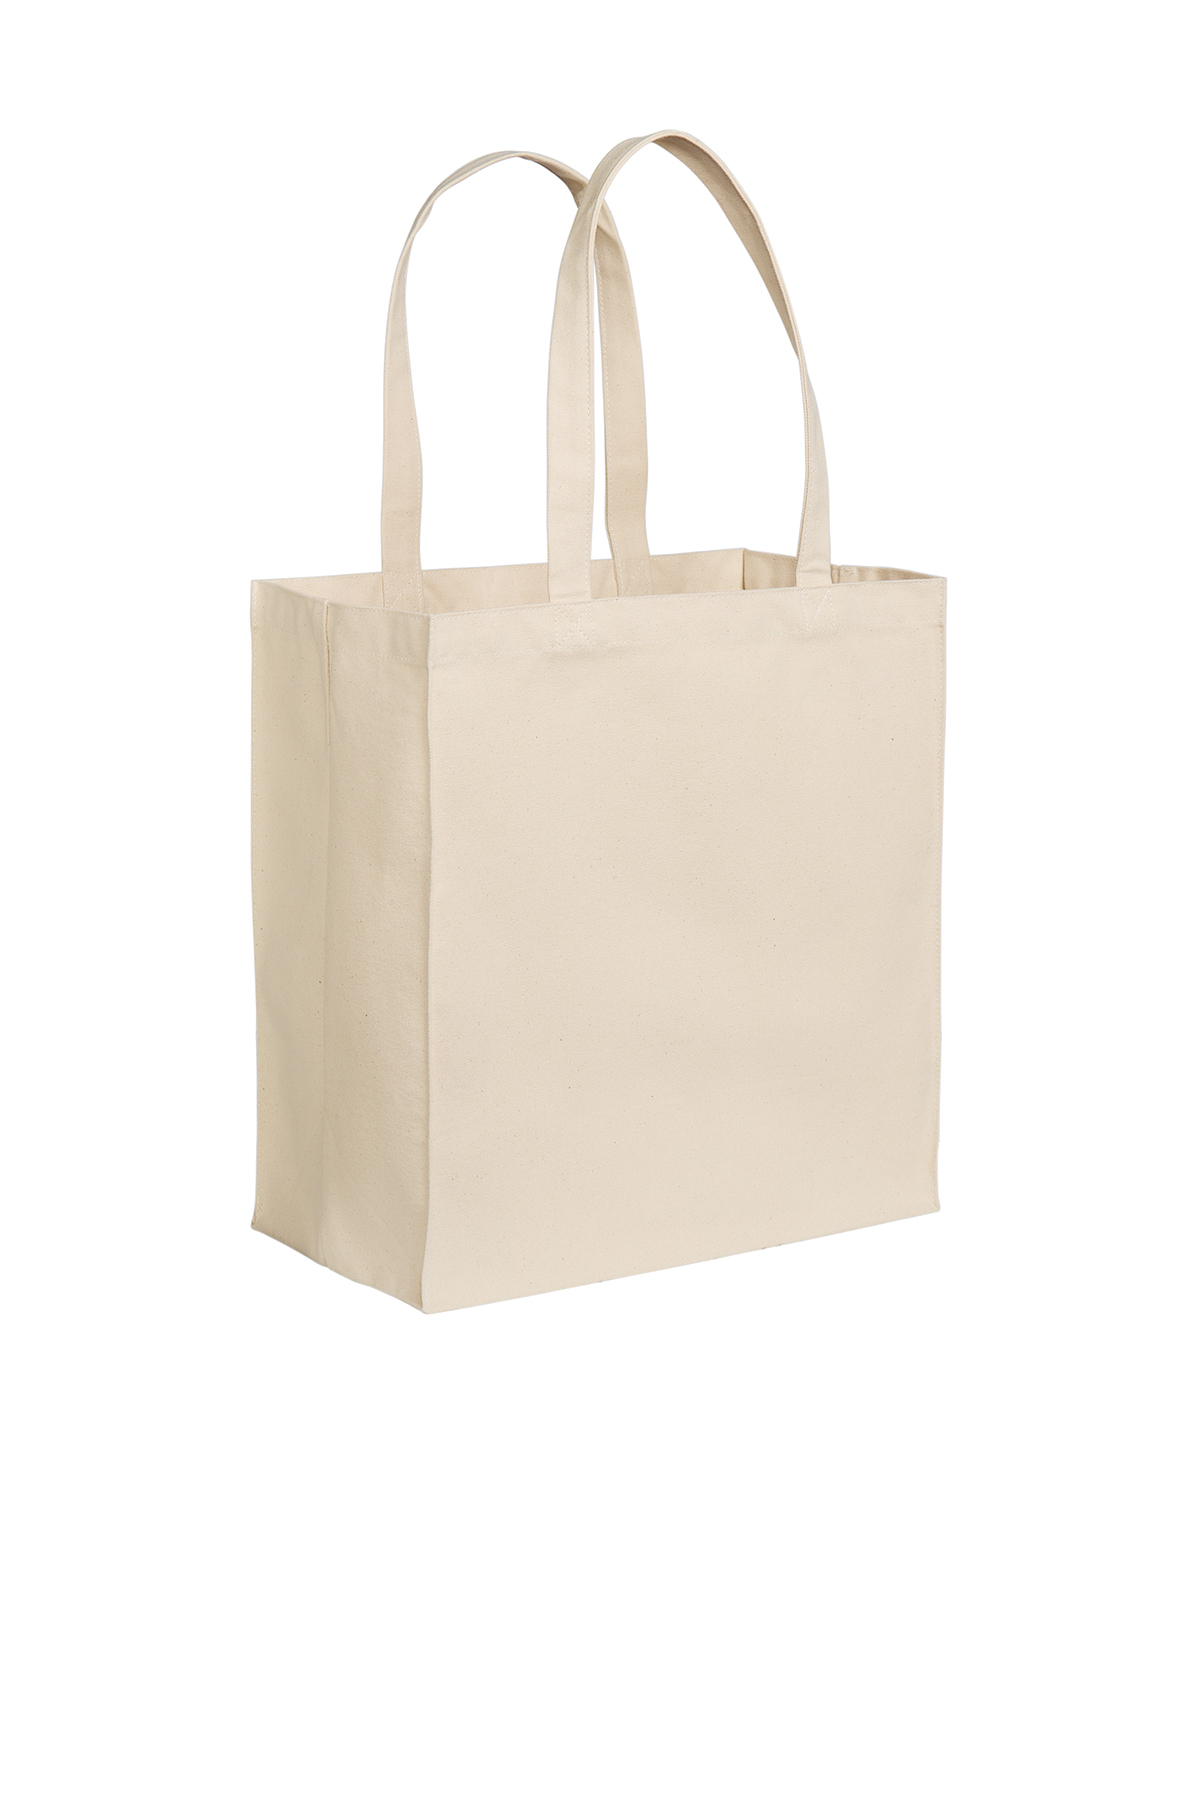 Port Authority Cotton Canvas Over-the-Shoulder Tote | Product | SanMar